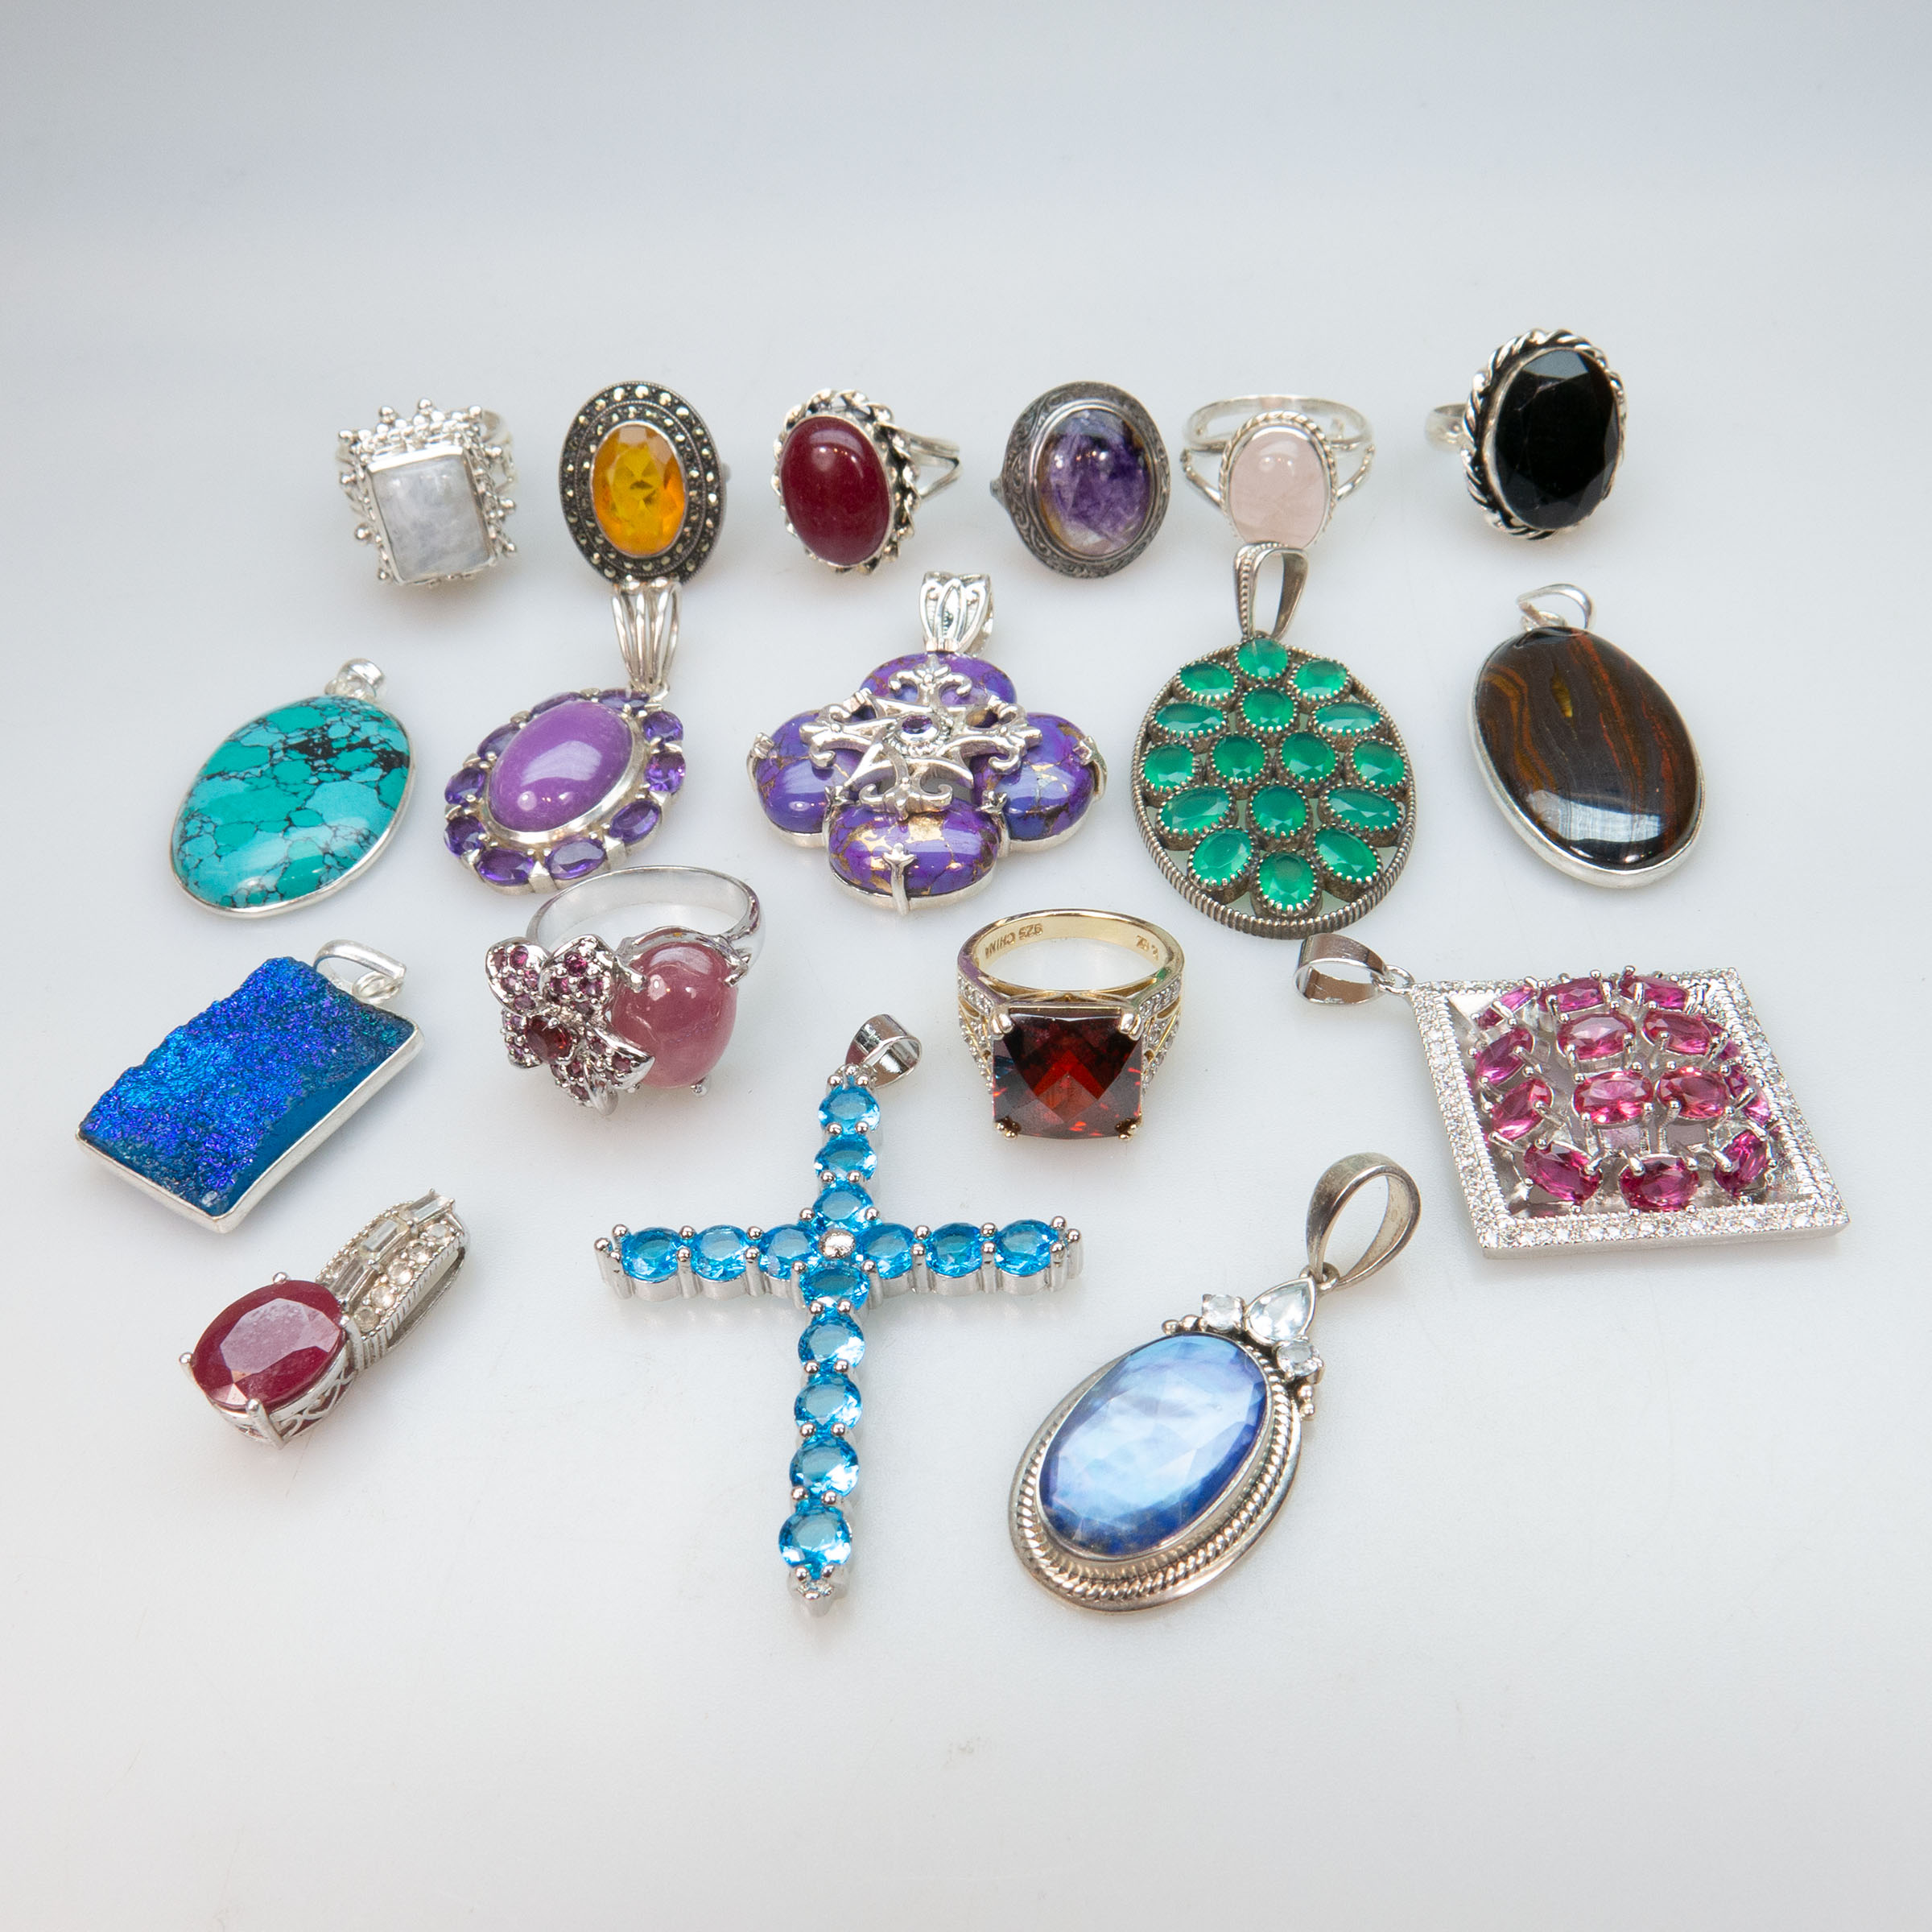 10 Sterling Silver Pendants And 8 Sterling Silver Rings